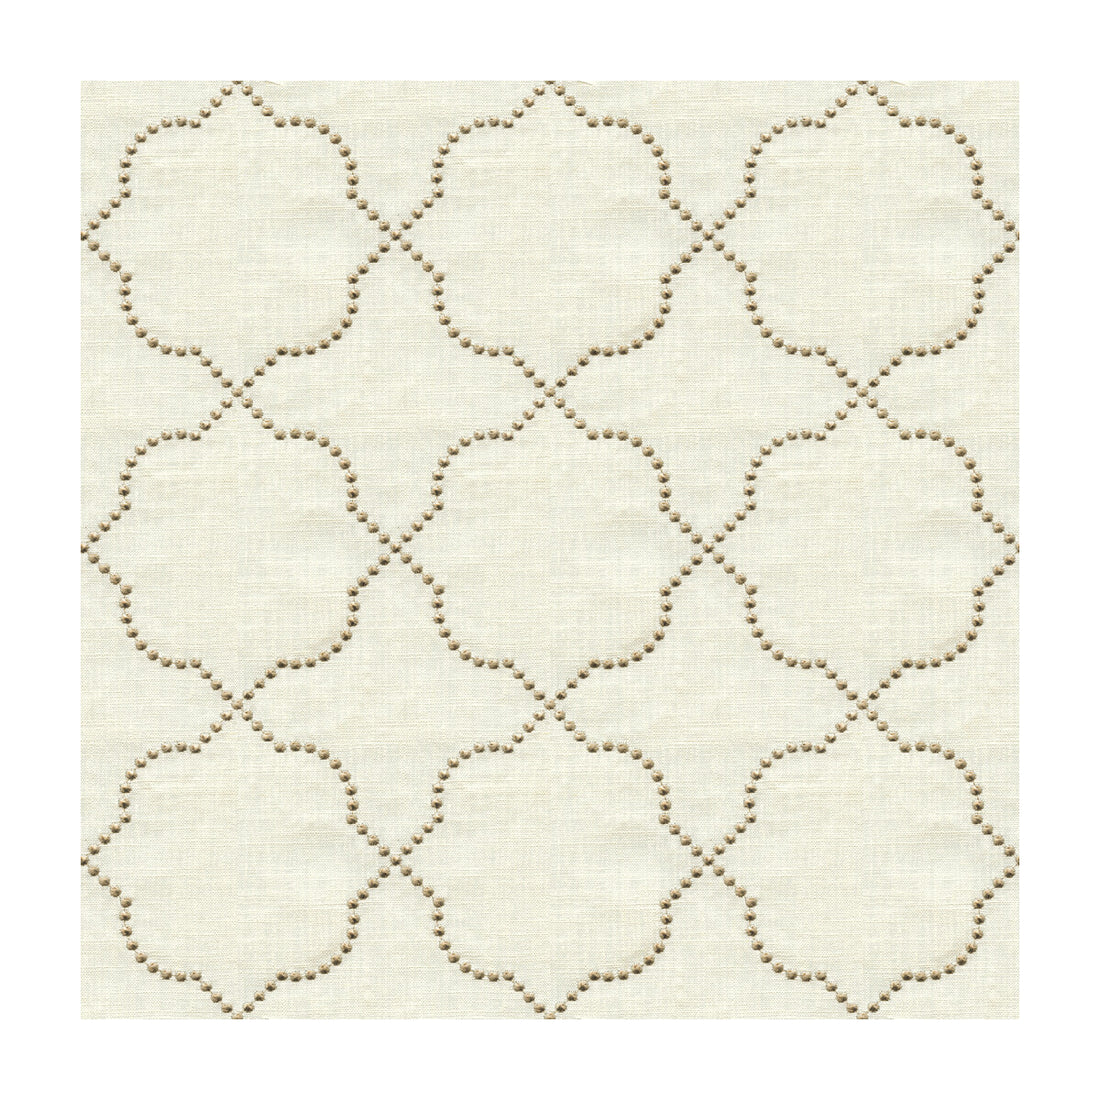 Tabari fabric in bone color - pattern 4072.116.0 - by Kravet Design in the Constantinople collection